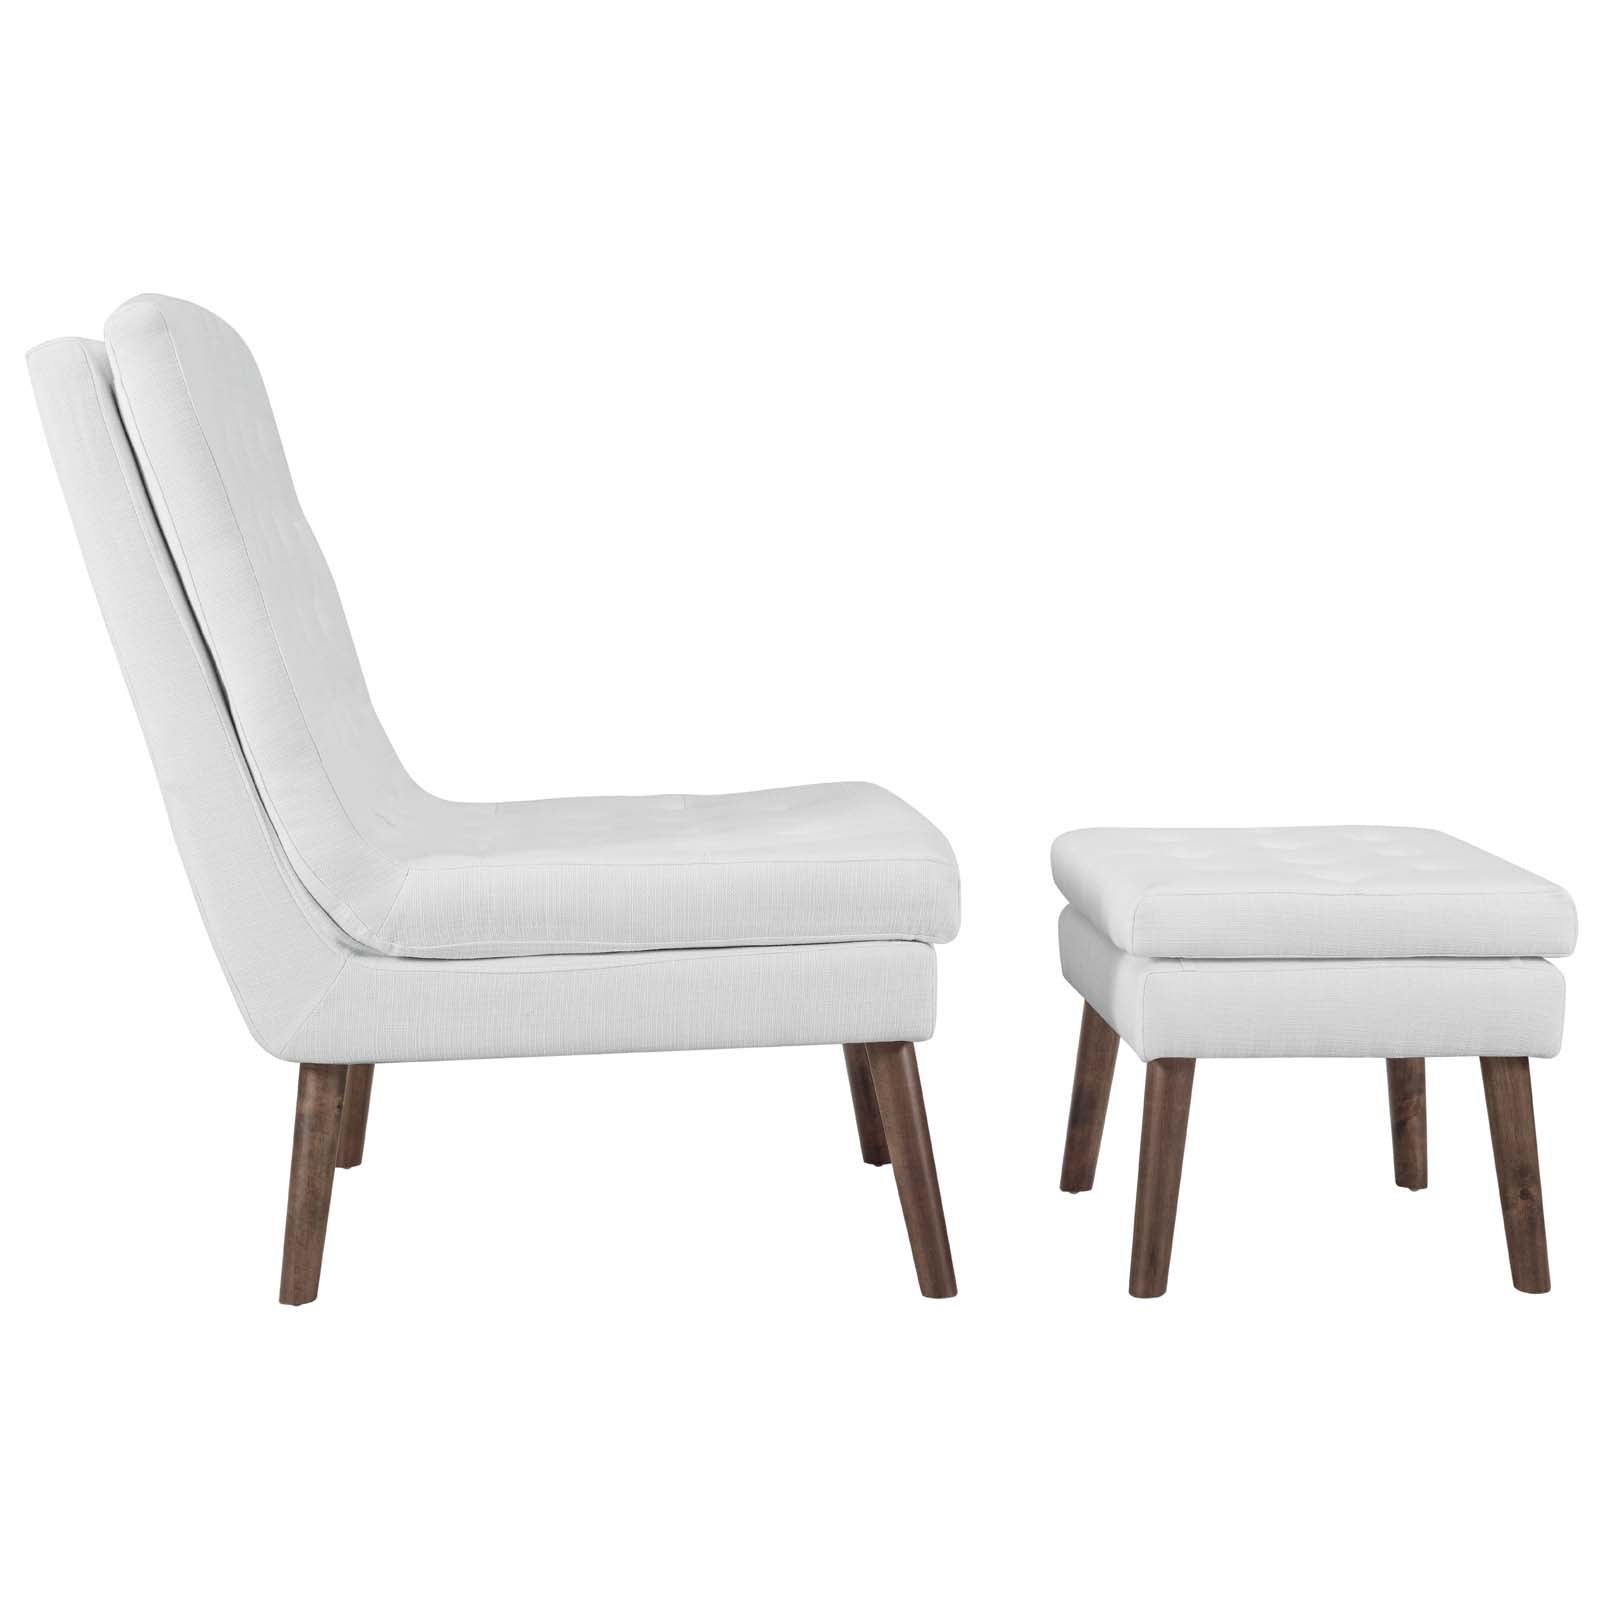 Modway Living Room Sets - Modify Upholstered Lounge Chair and Ottoman White